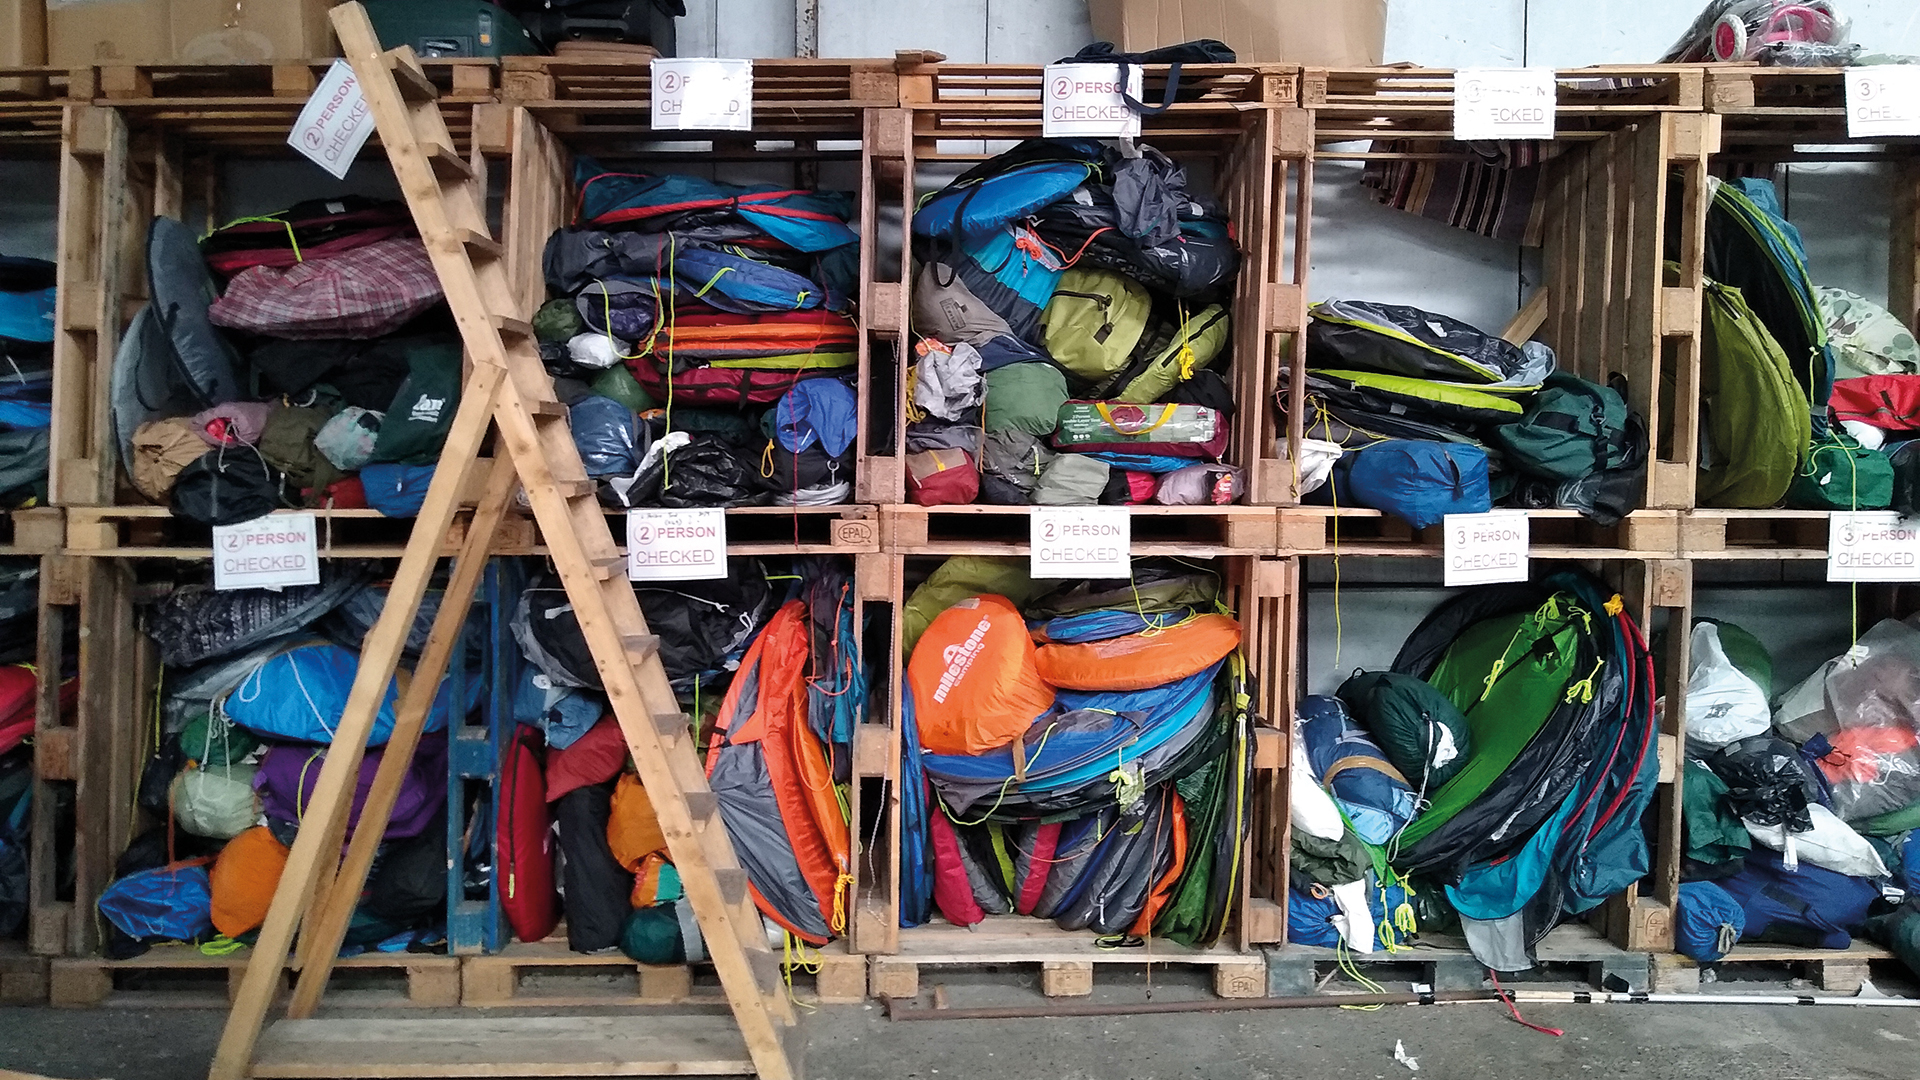 The warehouse relies on a constant supply of donated camping gear and clothing